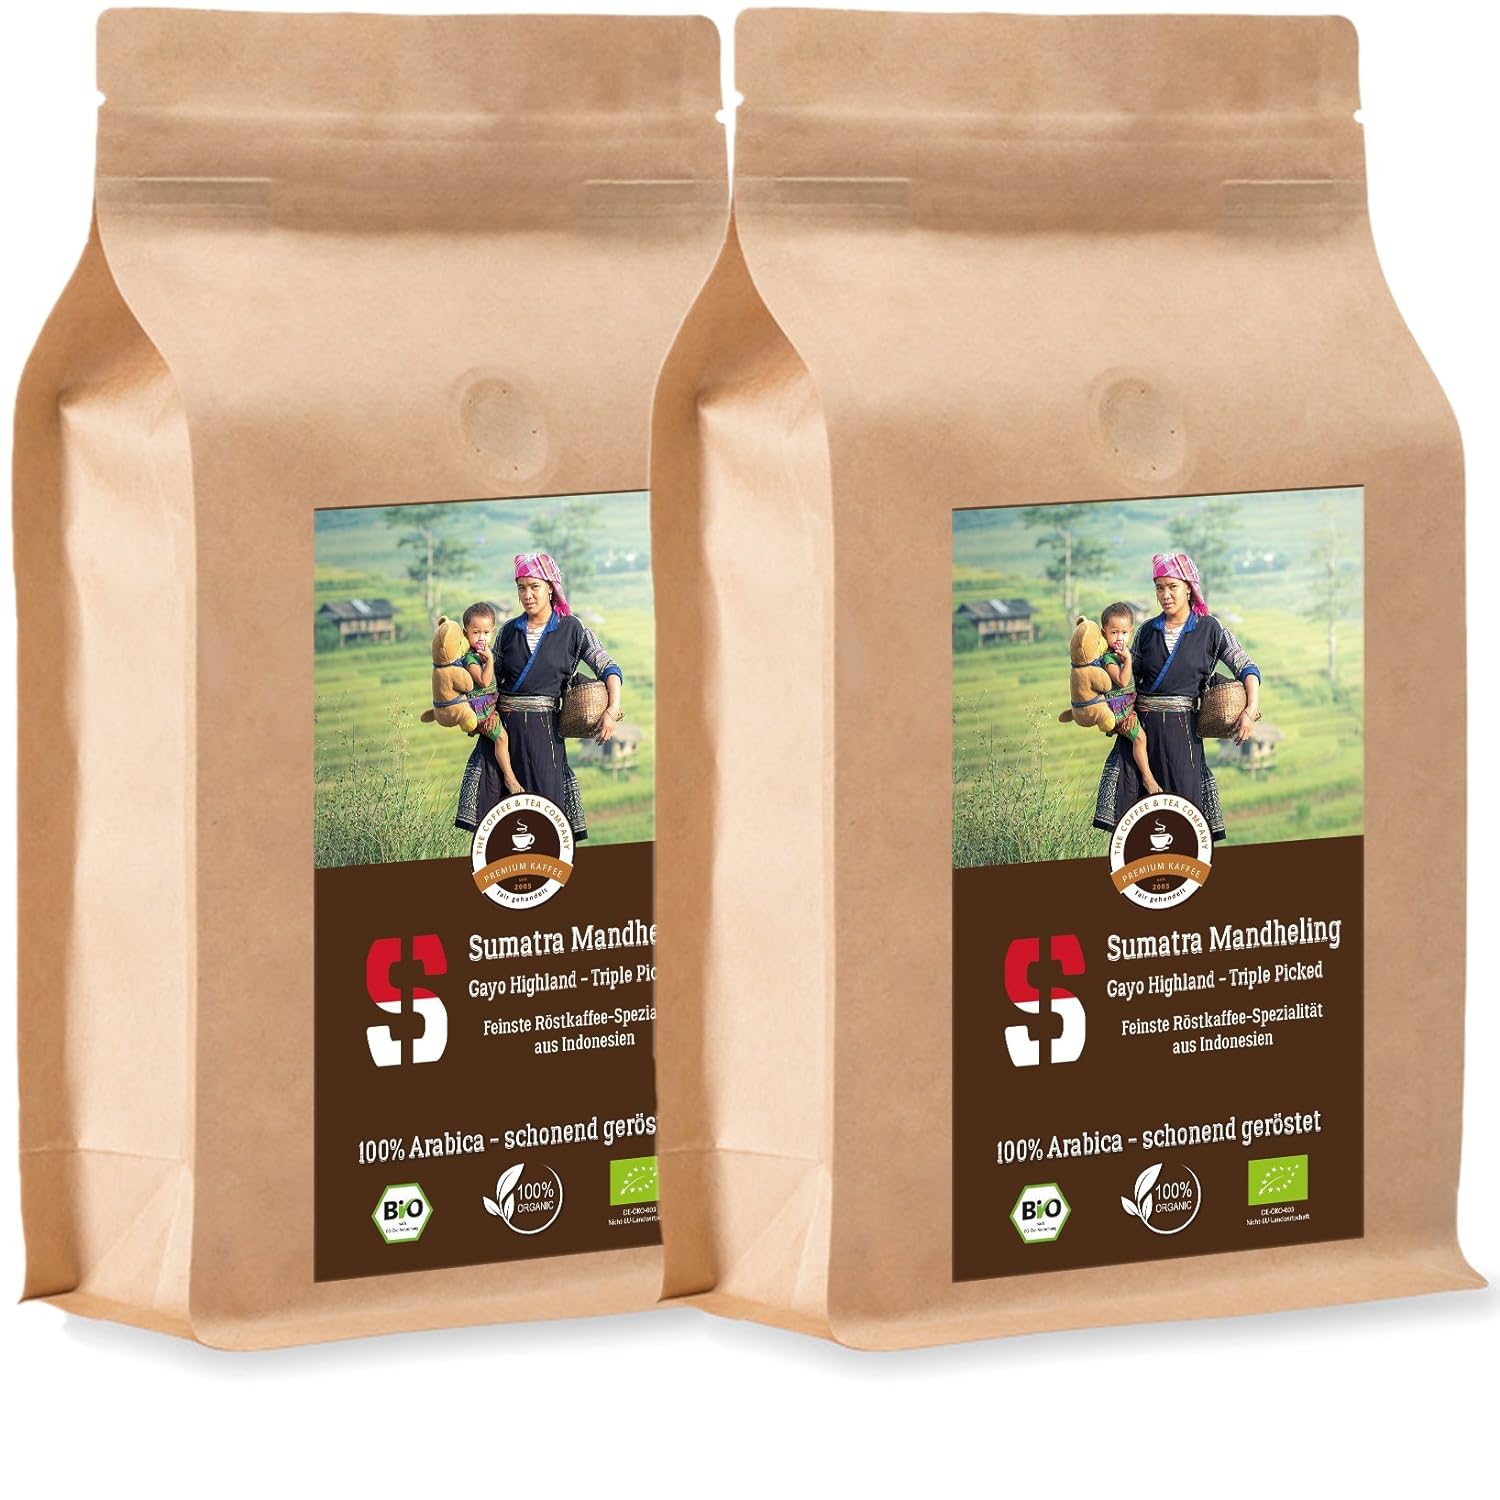 Coffee Globetrotter - Sumatra Mandheling Gayo Highland - Organic - 2 x 1000 g Very Fine Ground - for Fully Automatic Coffee Grinder - Roasted Coffee from Organic Cultivation | Refill Pack Economy Pack